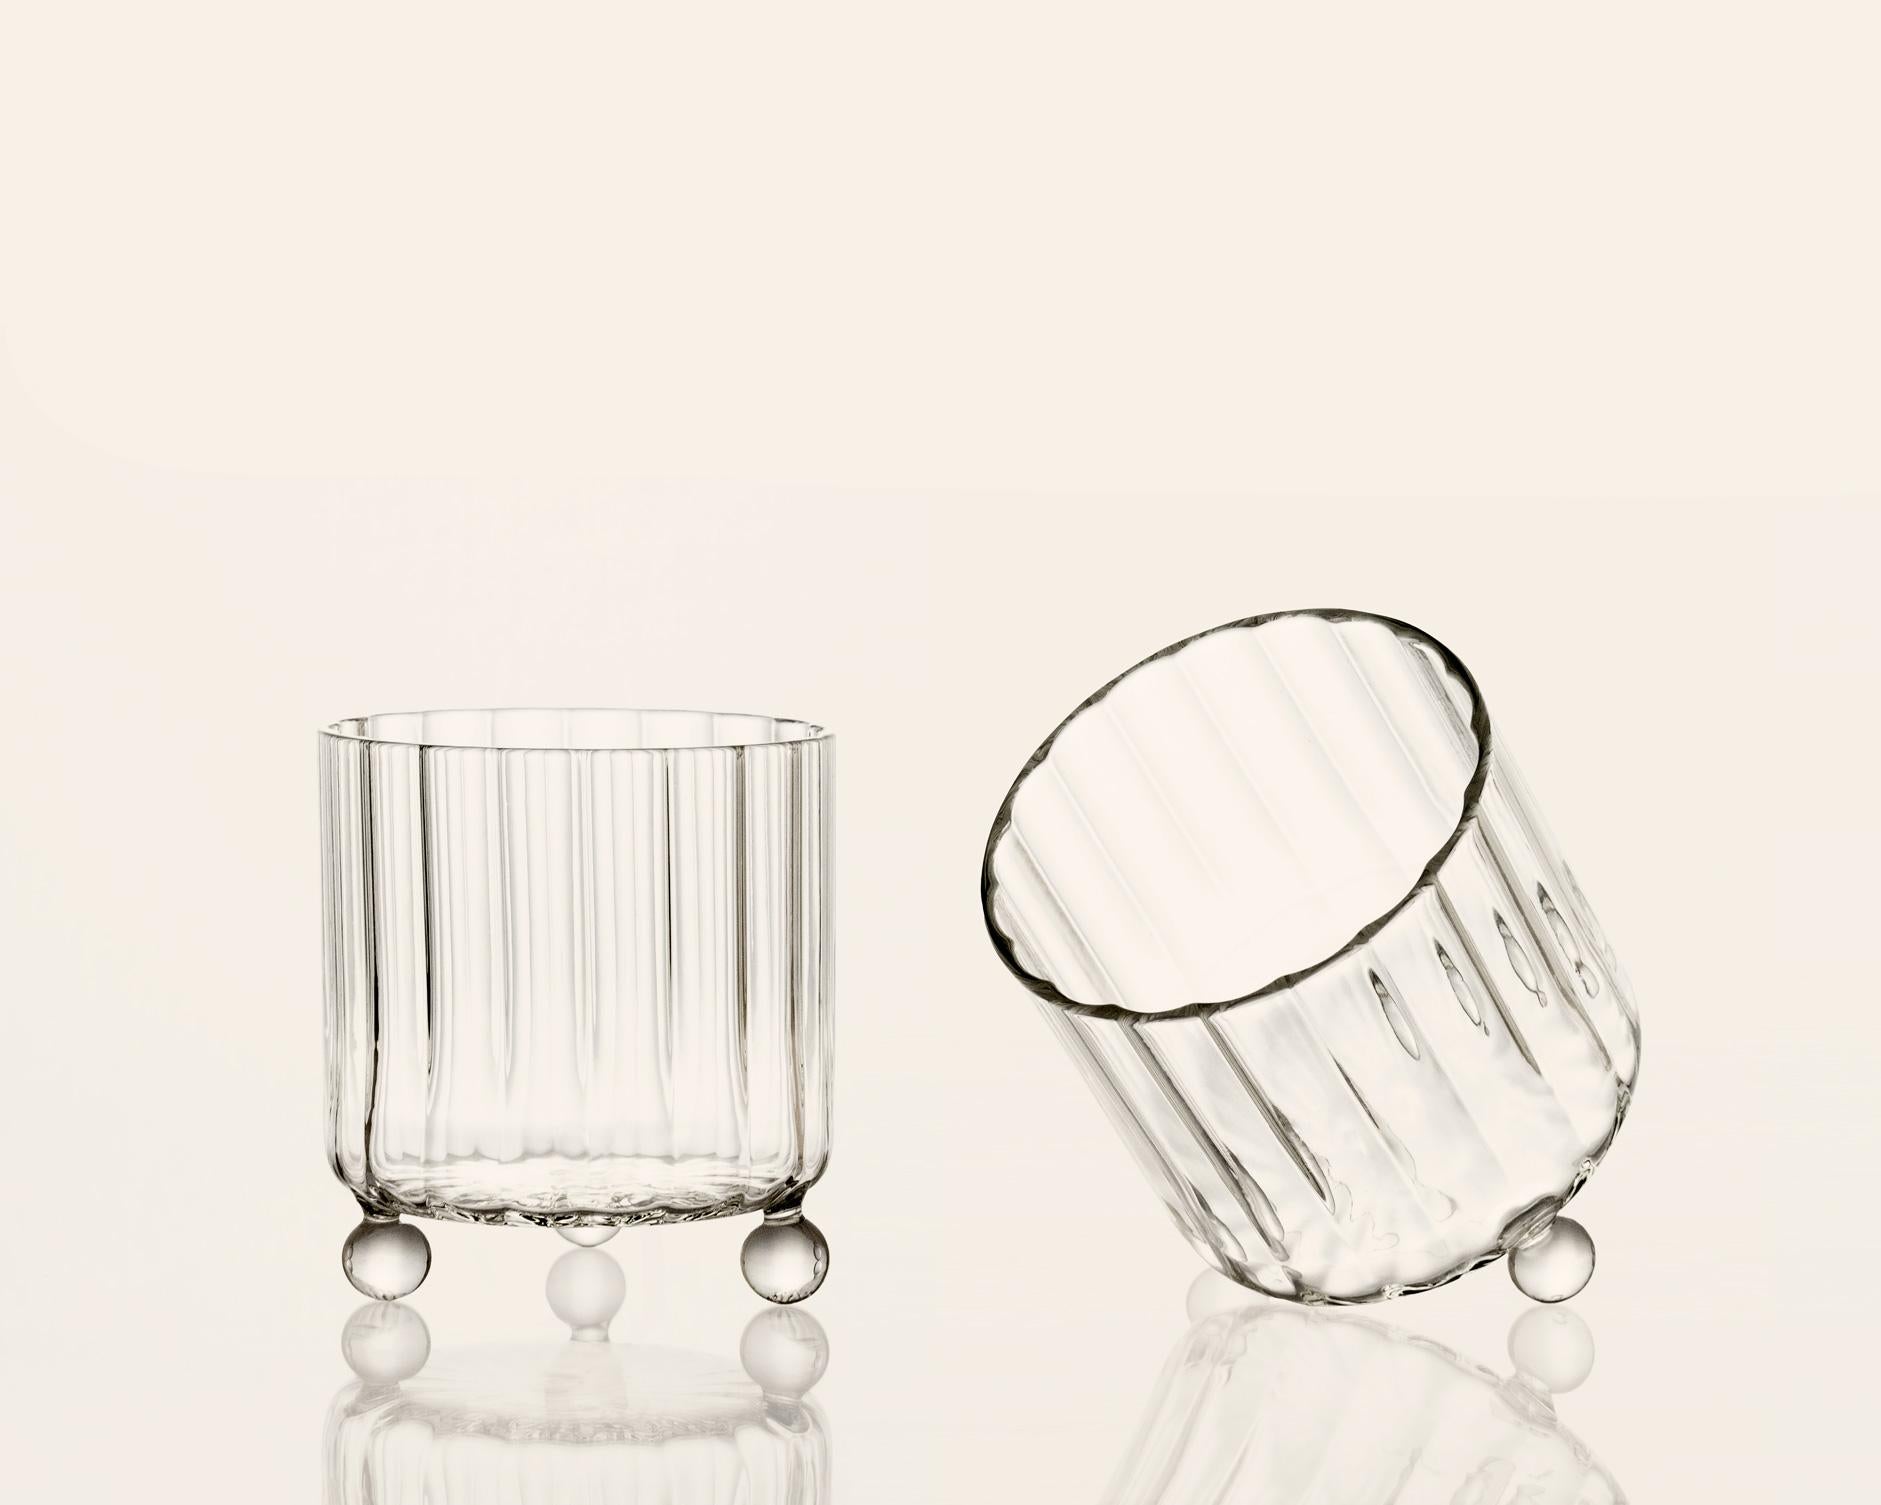 Post-Modern Contemporary High Spirits Lowball Glass by Agustina Bottoni — Handmade in Italy For Sale